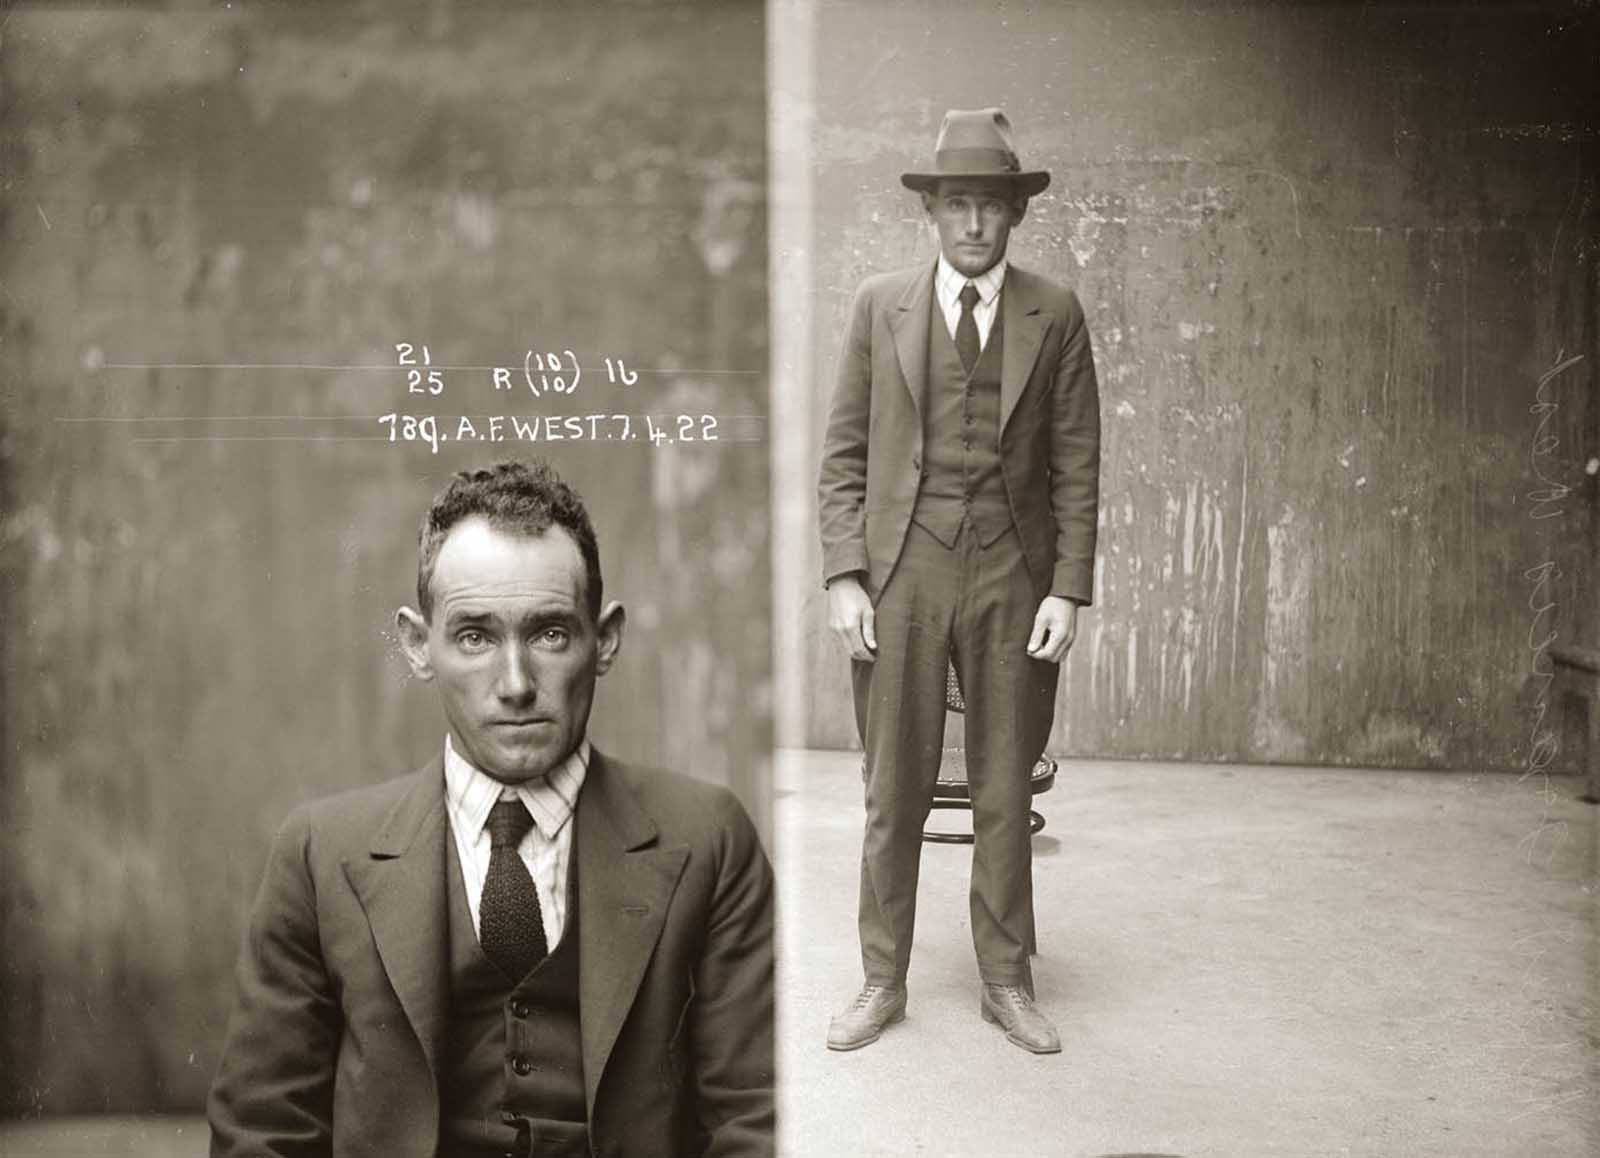 Vintage Criminals From The 1920s